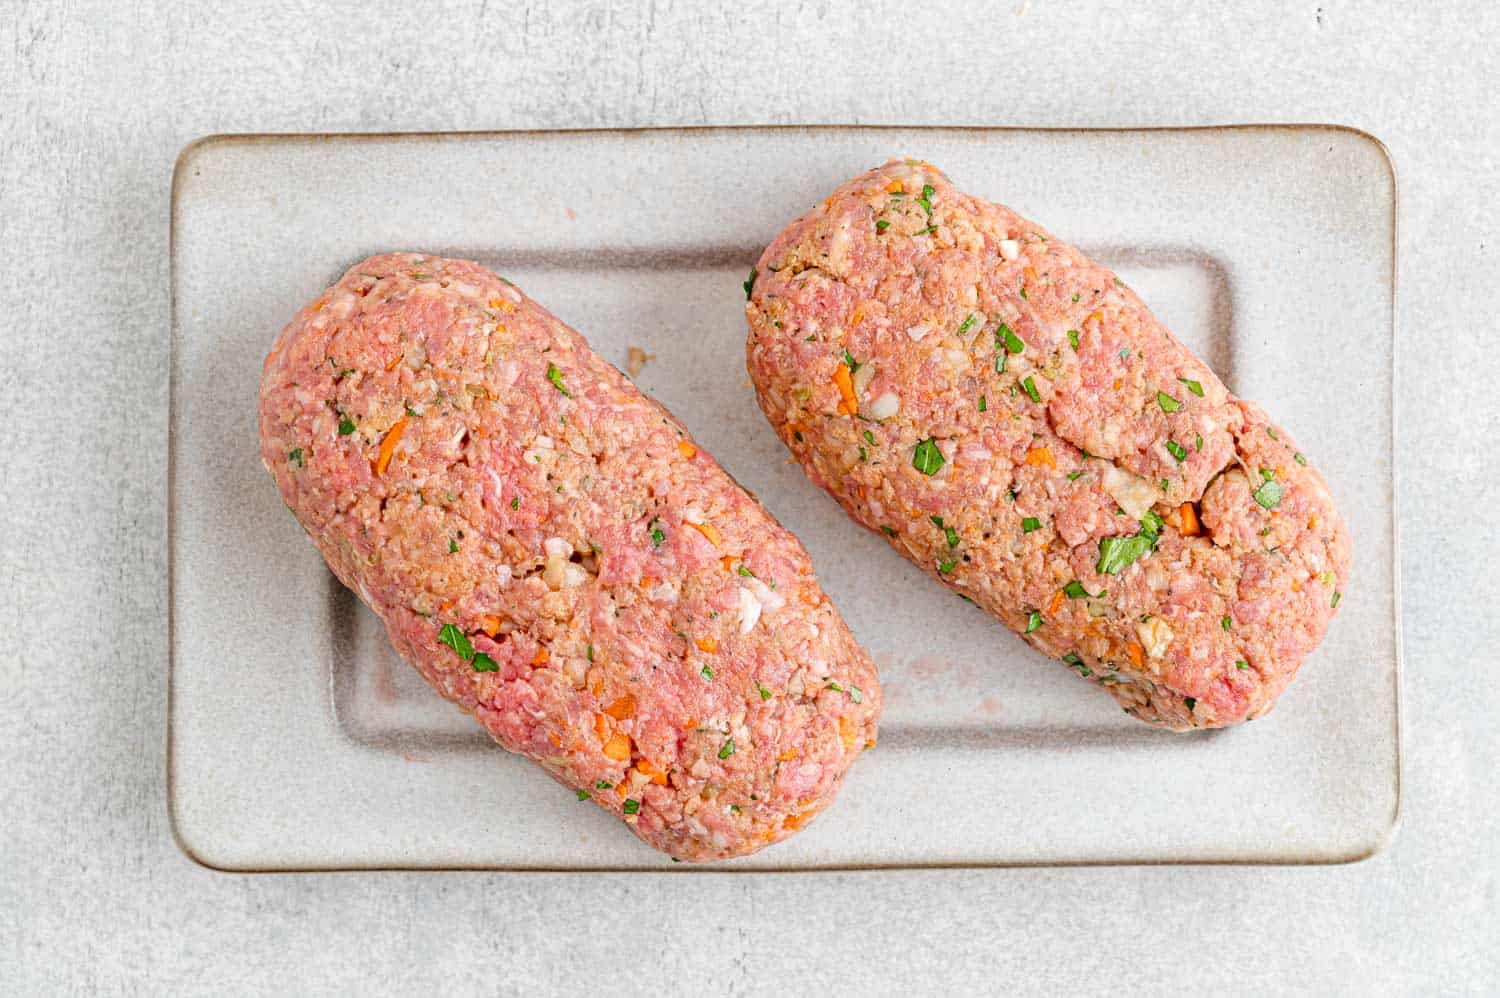 Meat formed into two loaves.